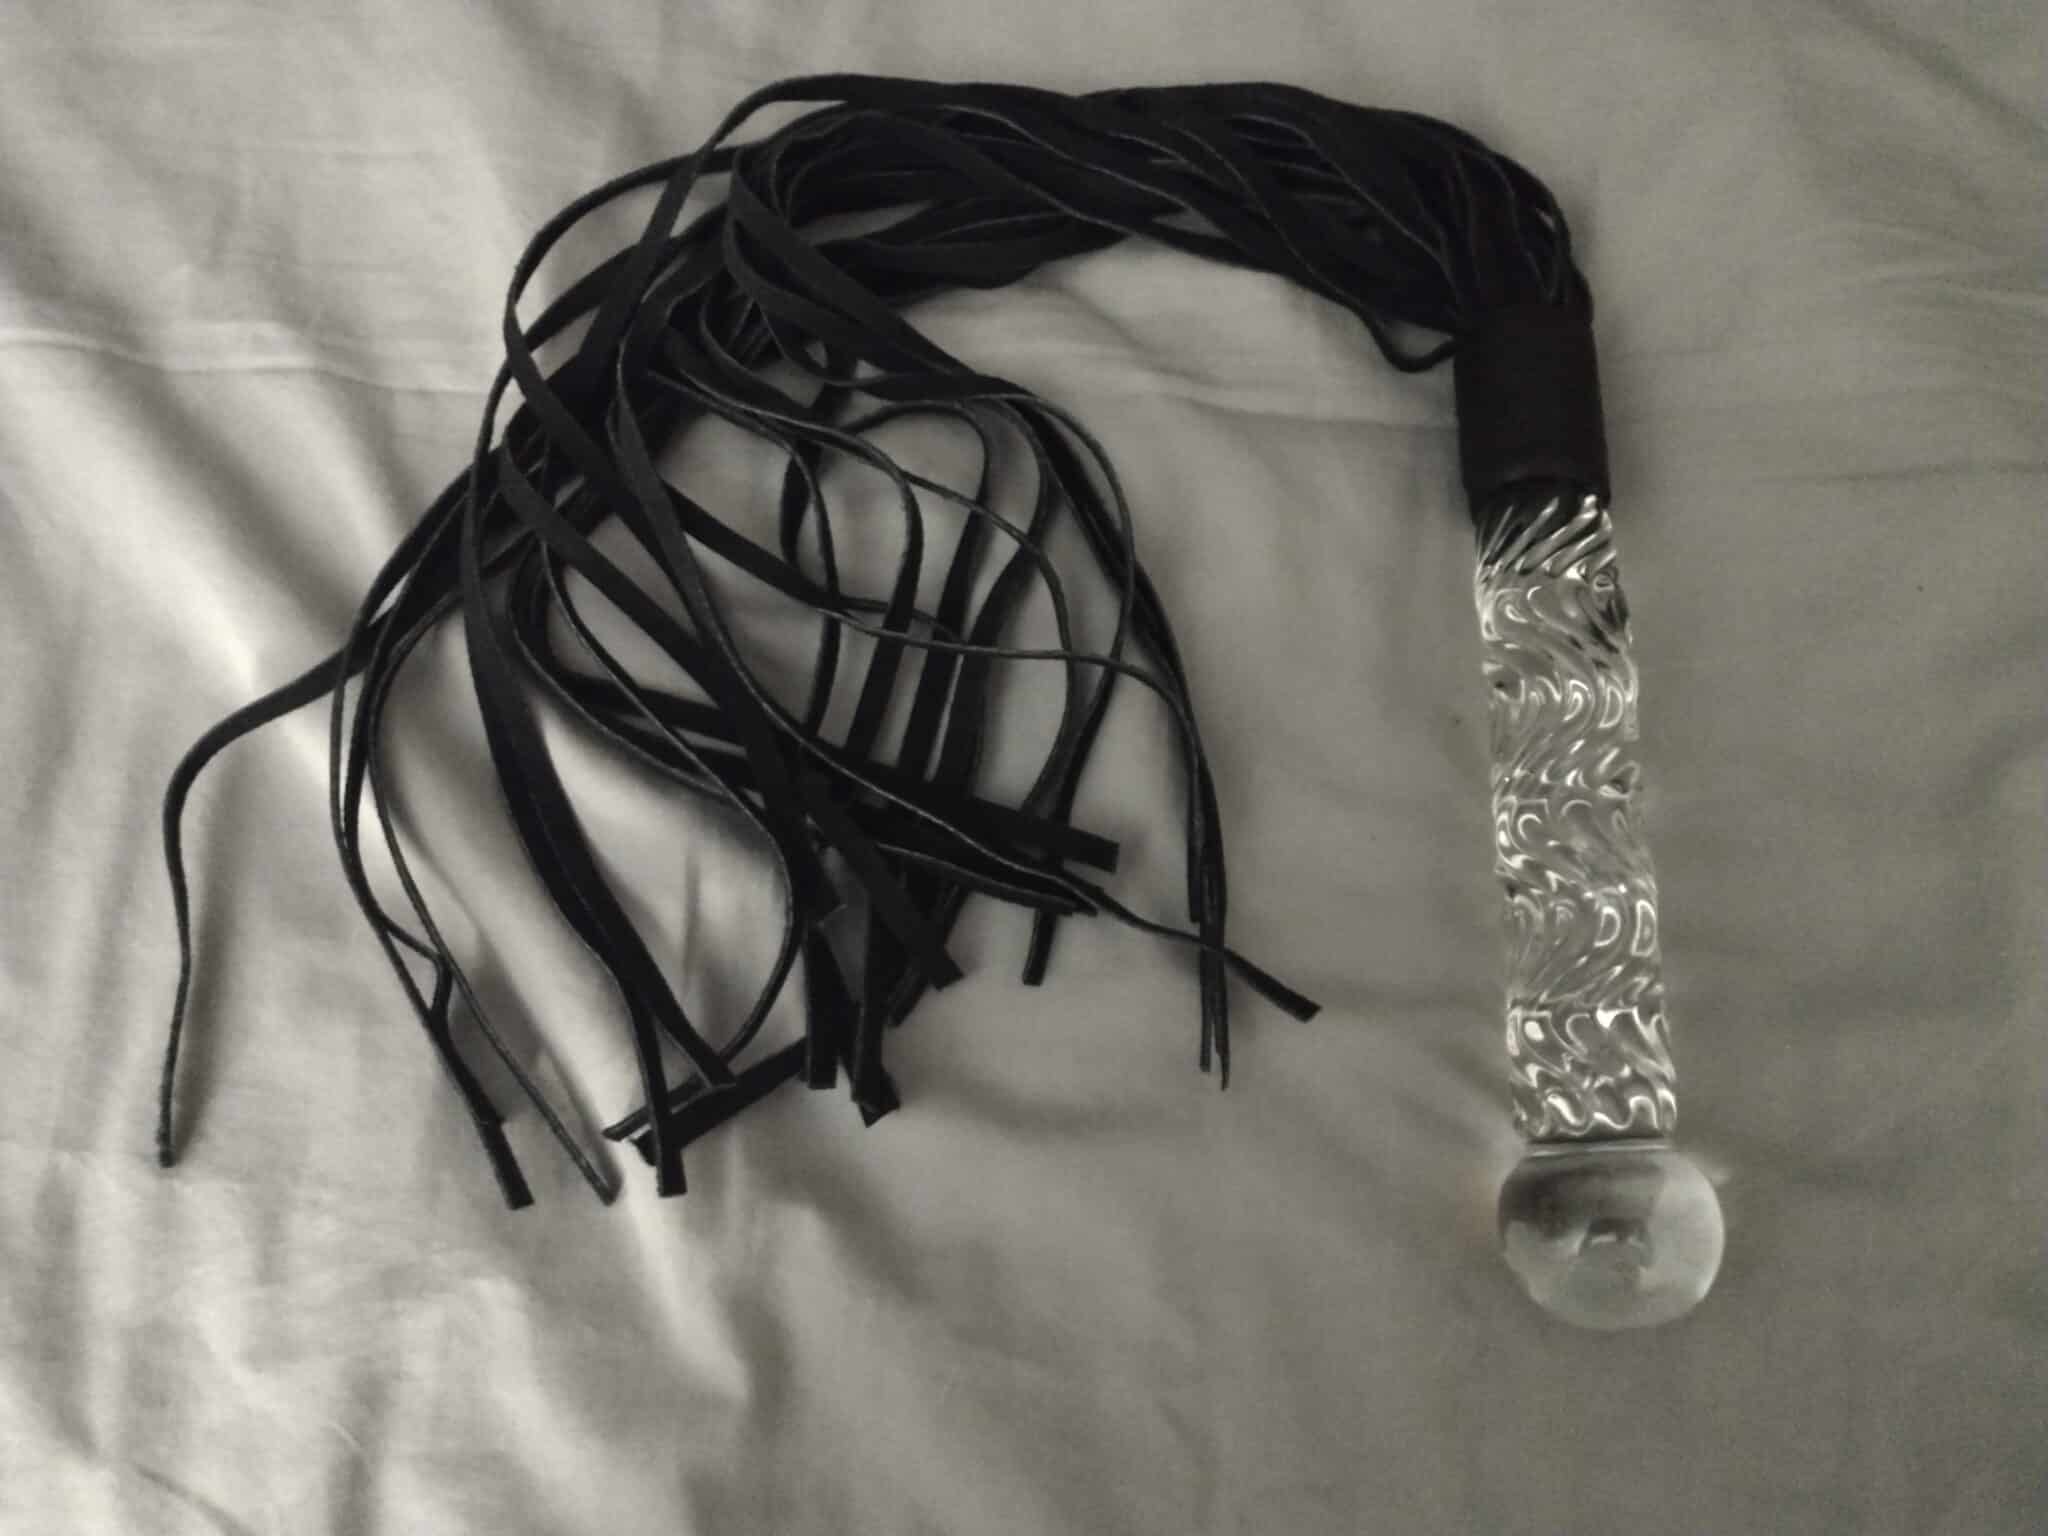 Icicles No. 38 Glass Dildo Flogger My take on the Icicles No. 38 Glass Dildo Flogger’s design